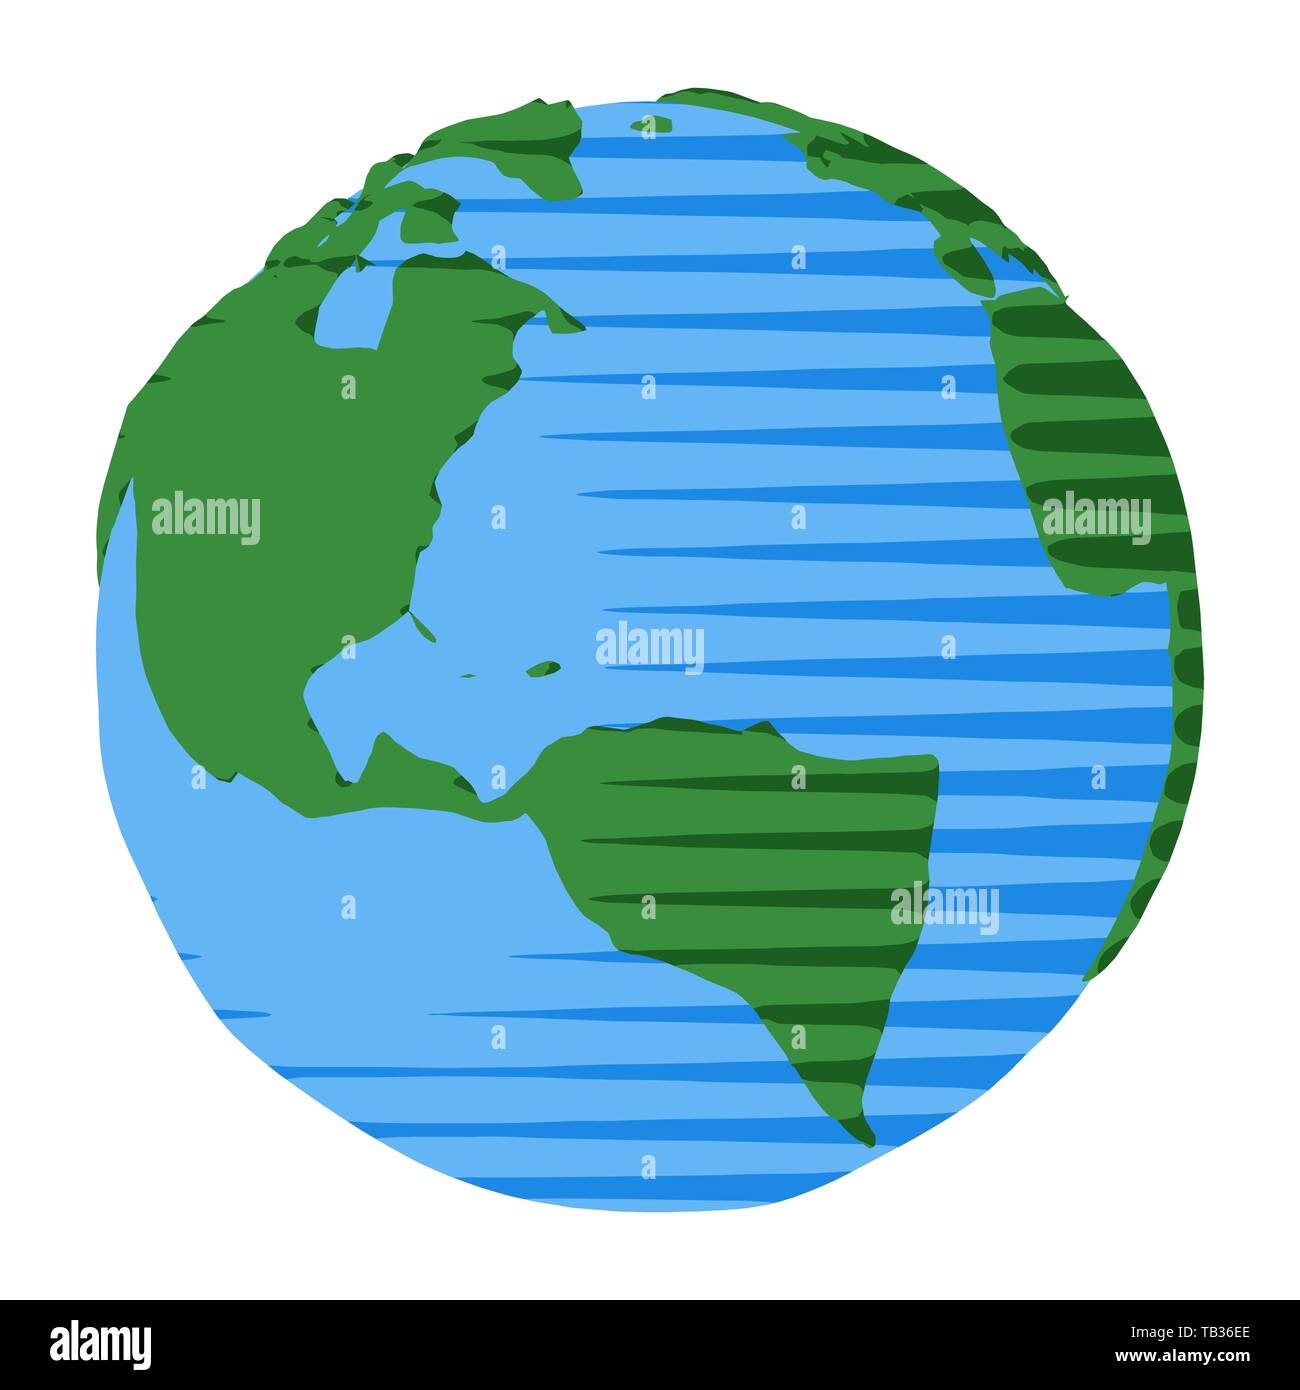 Simple illustration of America continent and Atlantic Ocean on geographical globe in comic style Stock Photo